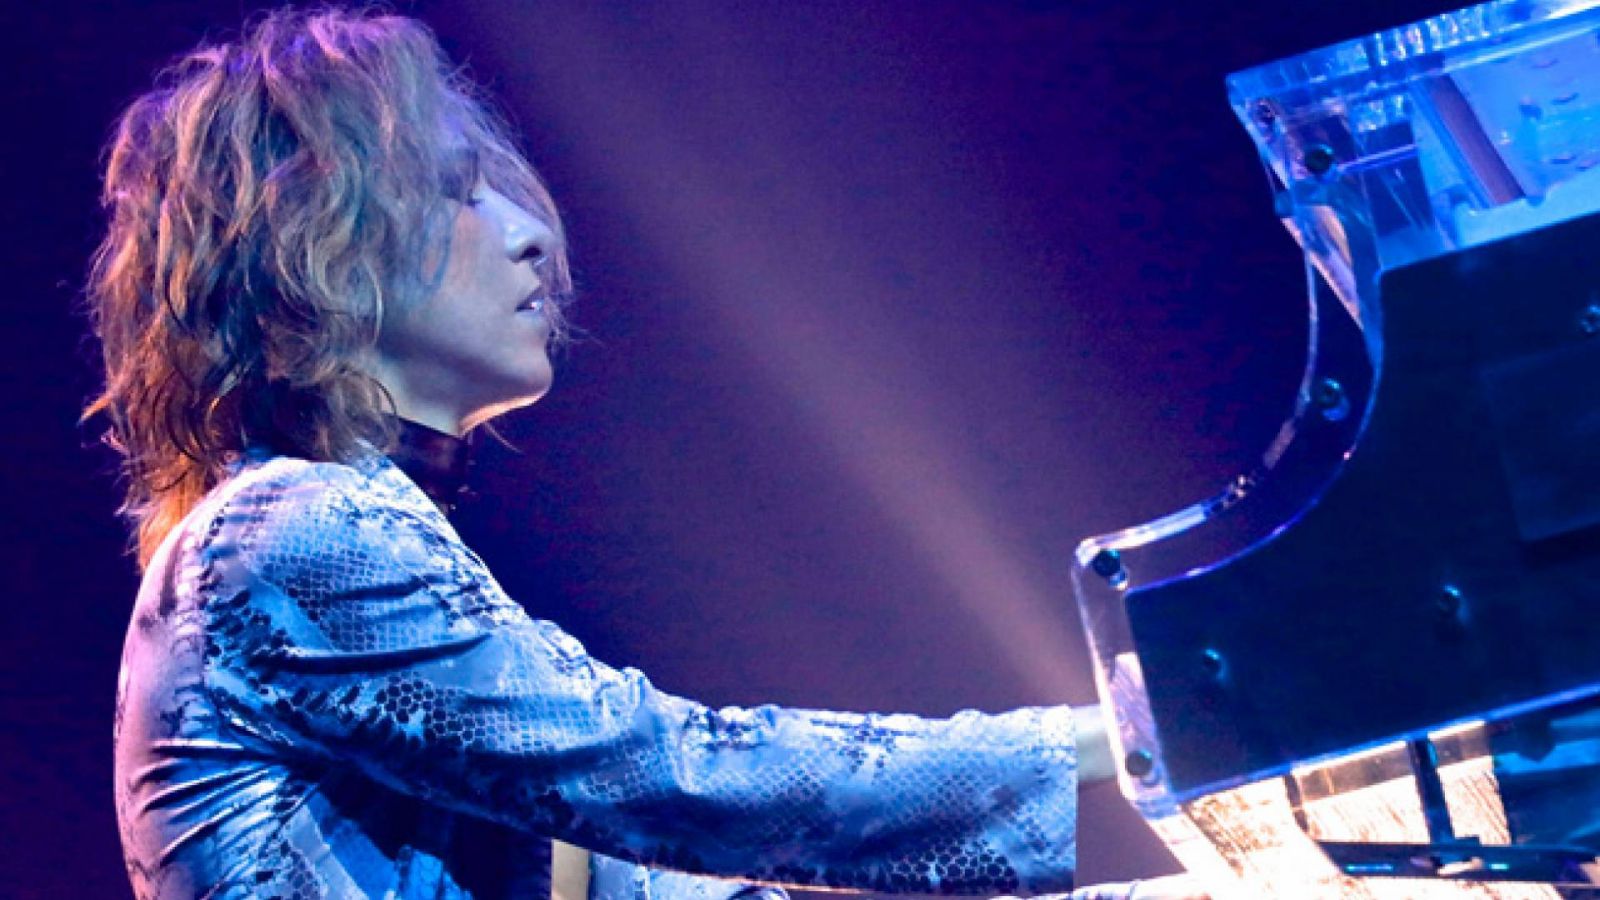 X JAPAN's YOSHIKI Completes Surgery, Begins Recovery in Los Angeles © YOSHIKI